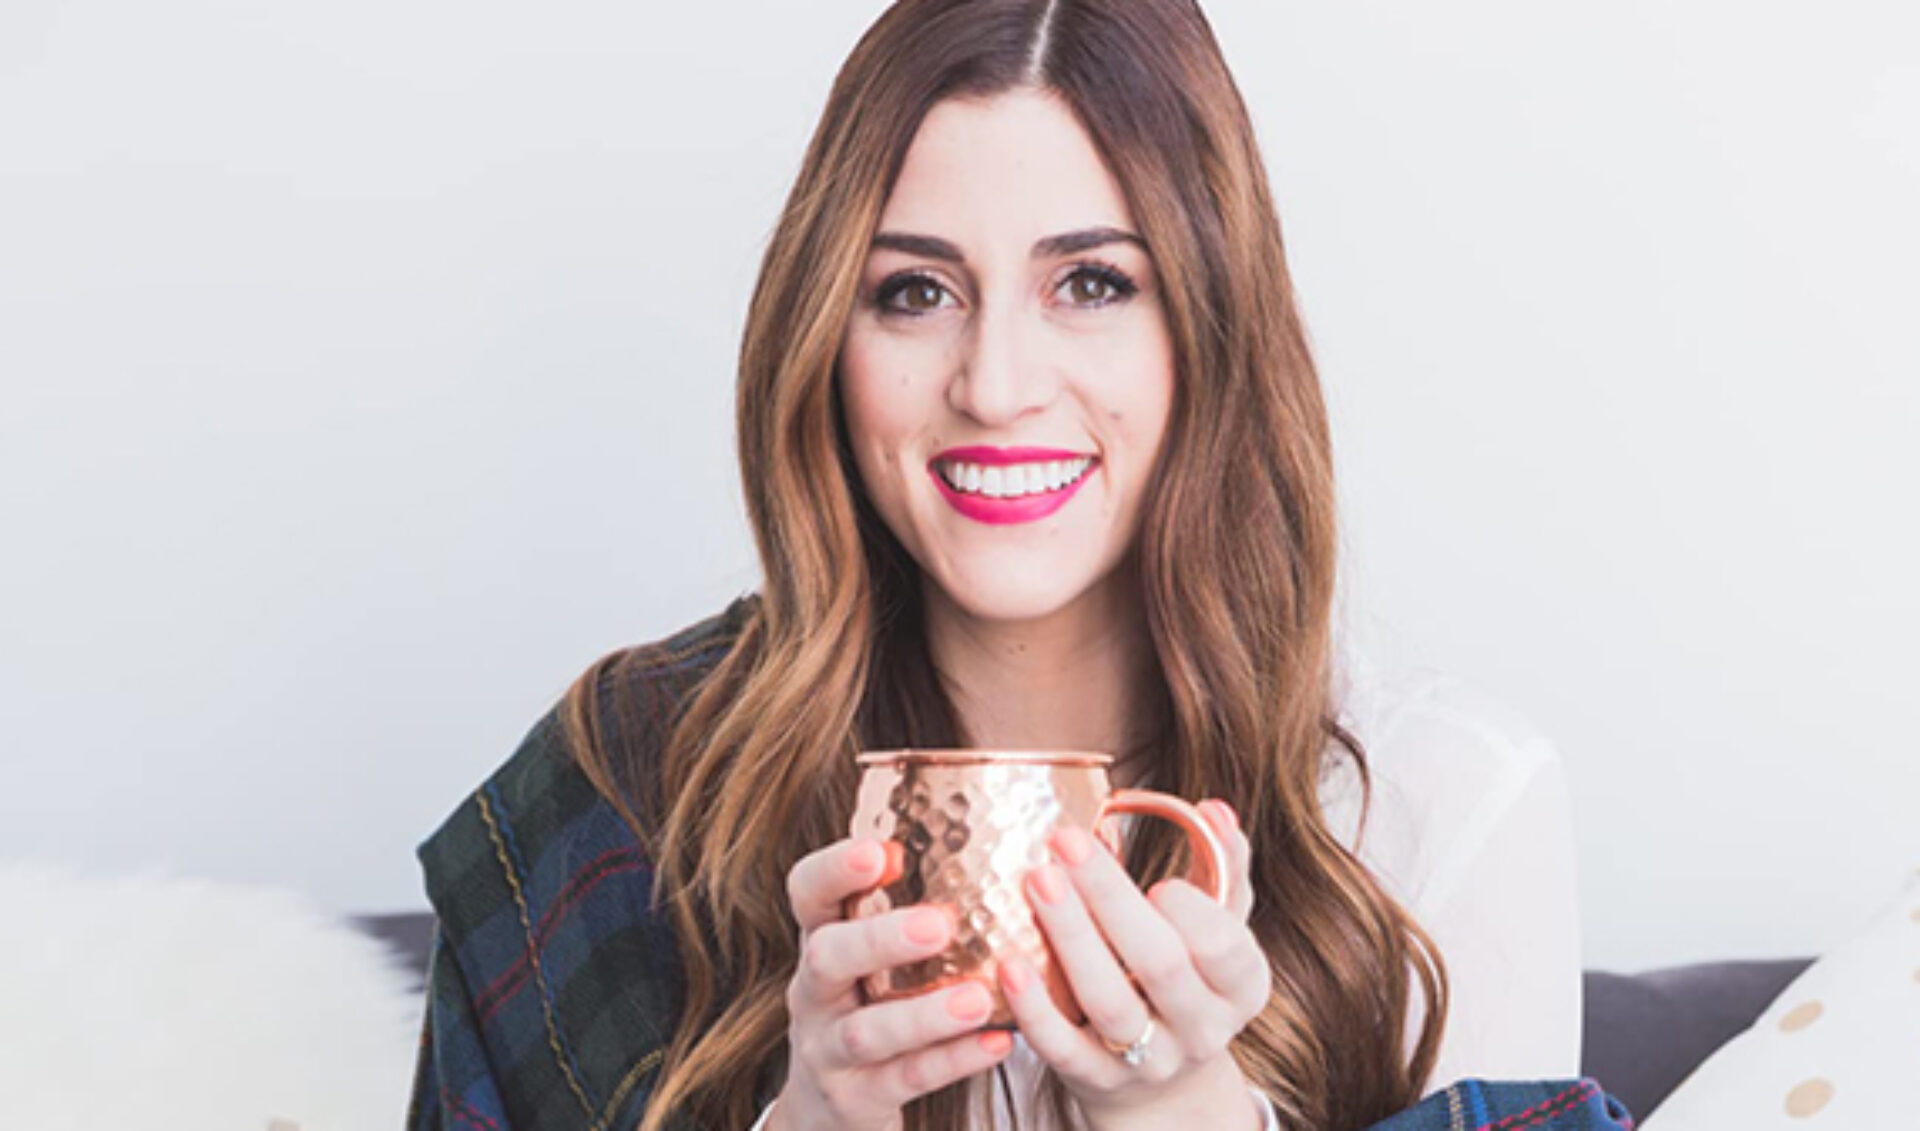 YouTube Millionaires: Cleaning, organizing, couponing, creating…Kallie Branciforte does it all. But first, she needs some coffee.